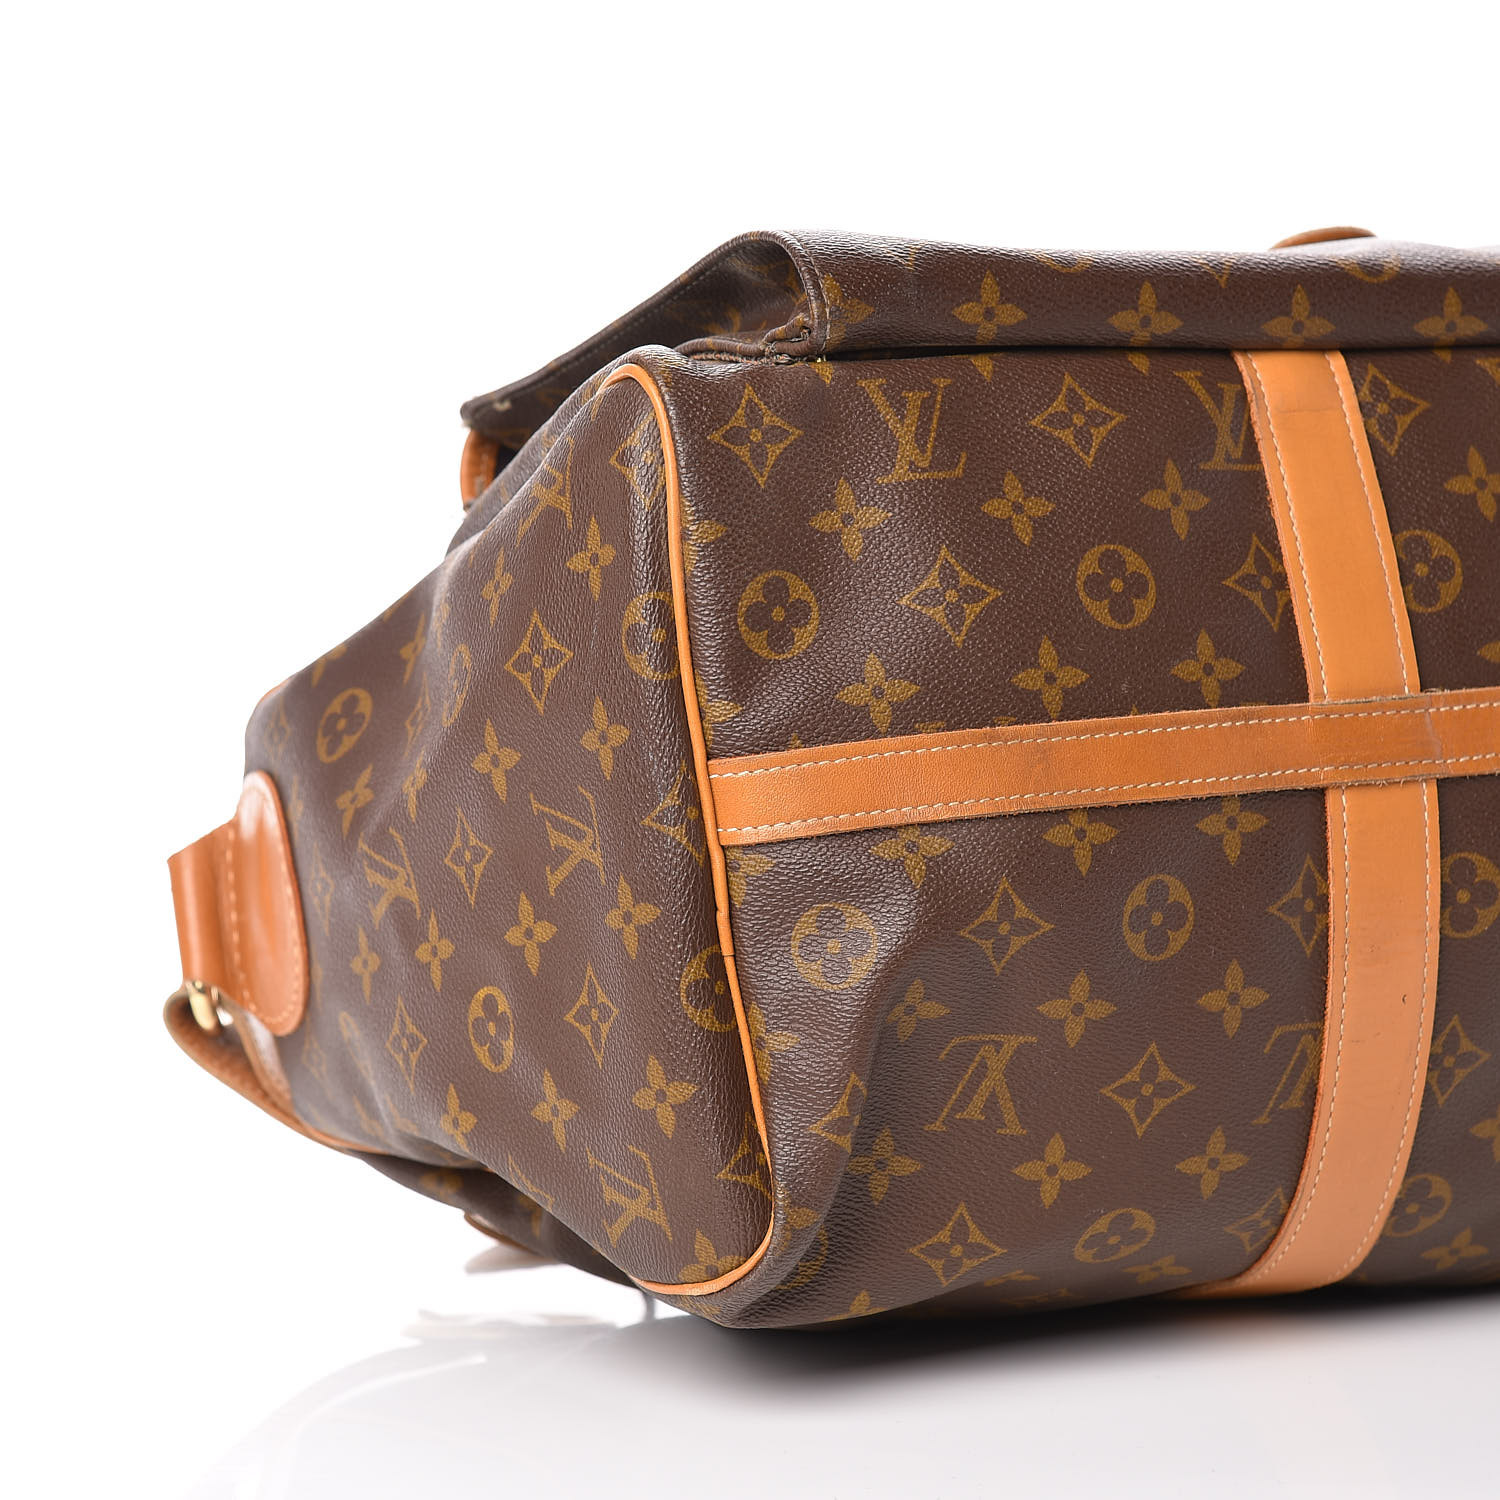 LOUIS VUITTON French Company Weekender Bag 411461